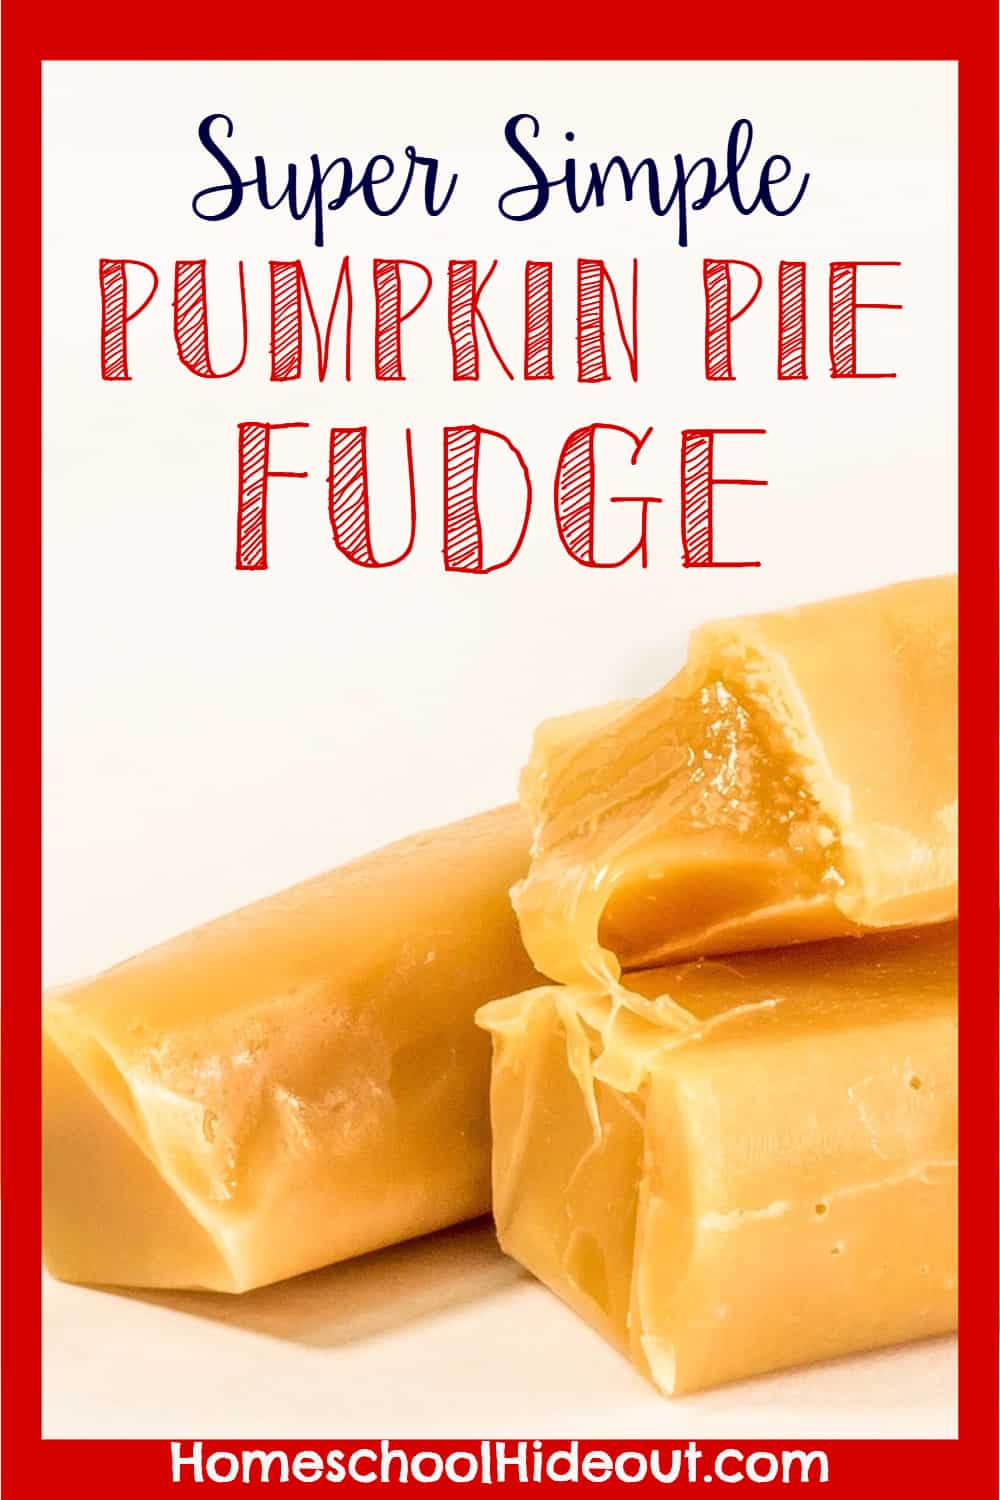 Pumpkin Pie Fudge is as easy as it is delicious. I already had all the ingredients ON HAND, too! YAY!